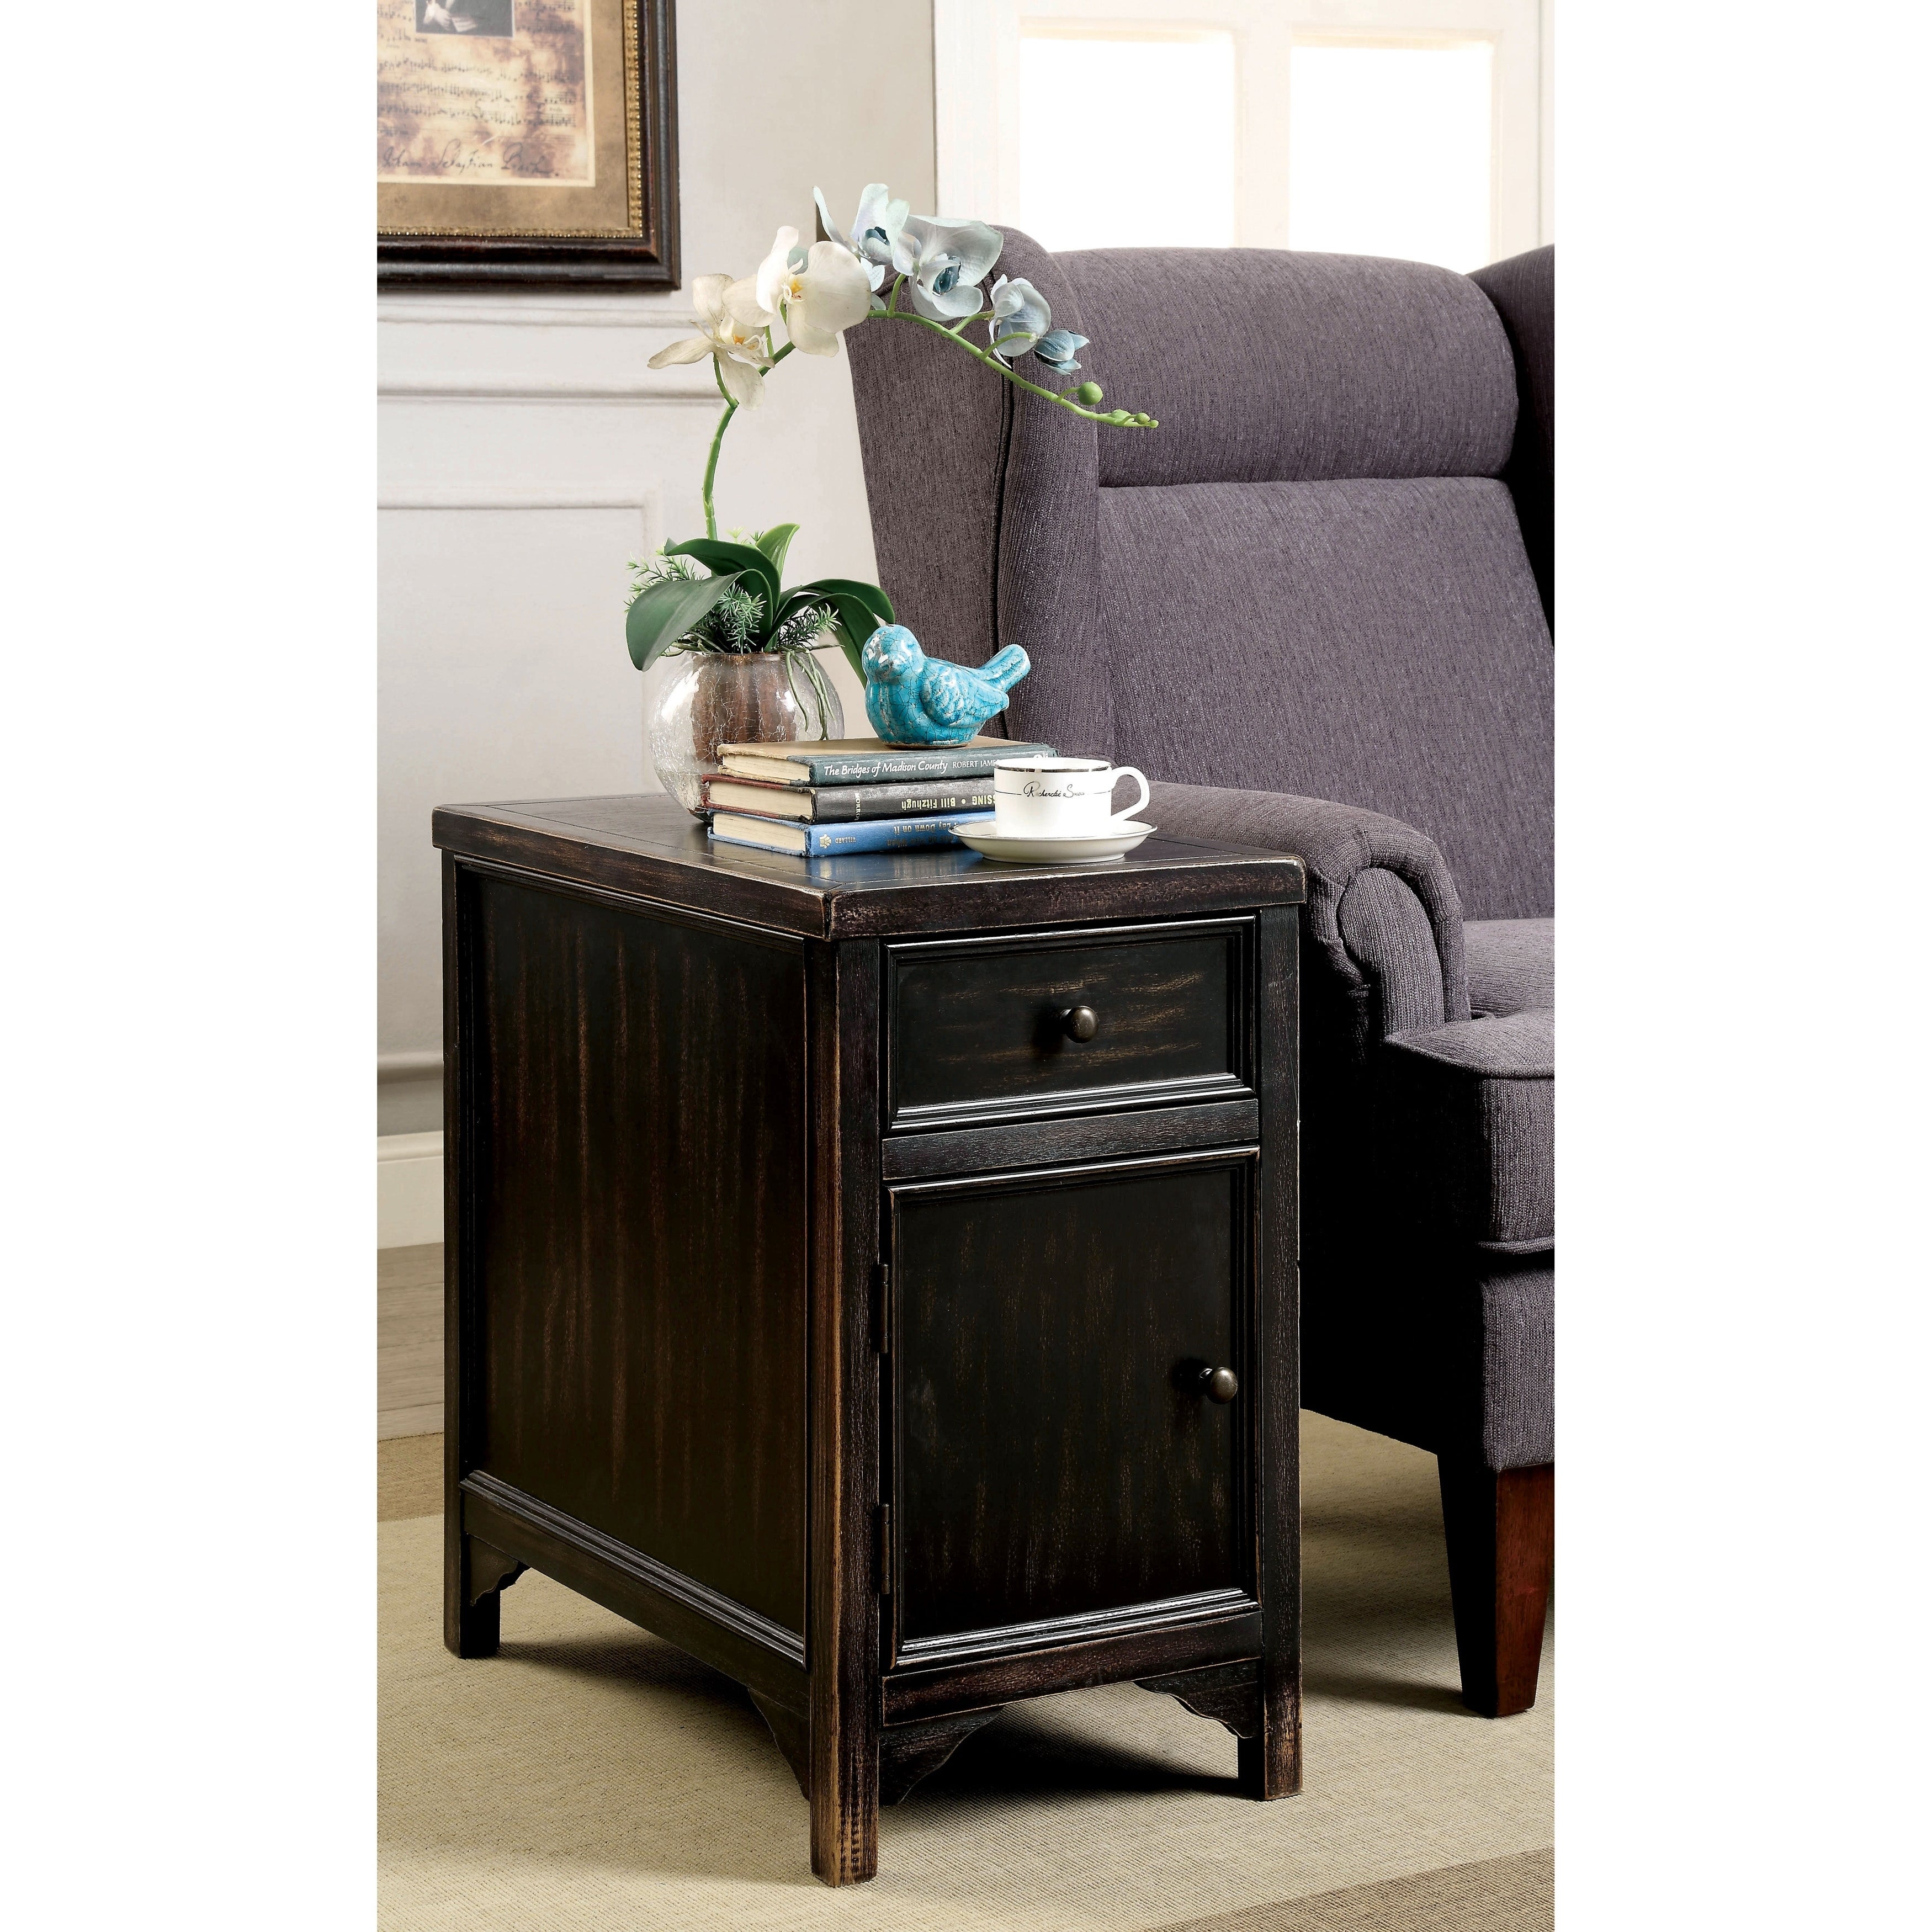 cosbin rustic bold antique black side table foa end tables lexington armoire entertainment center butterfly what color rug with chocolate brown couch traditional coffee designs